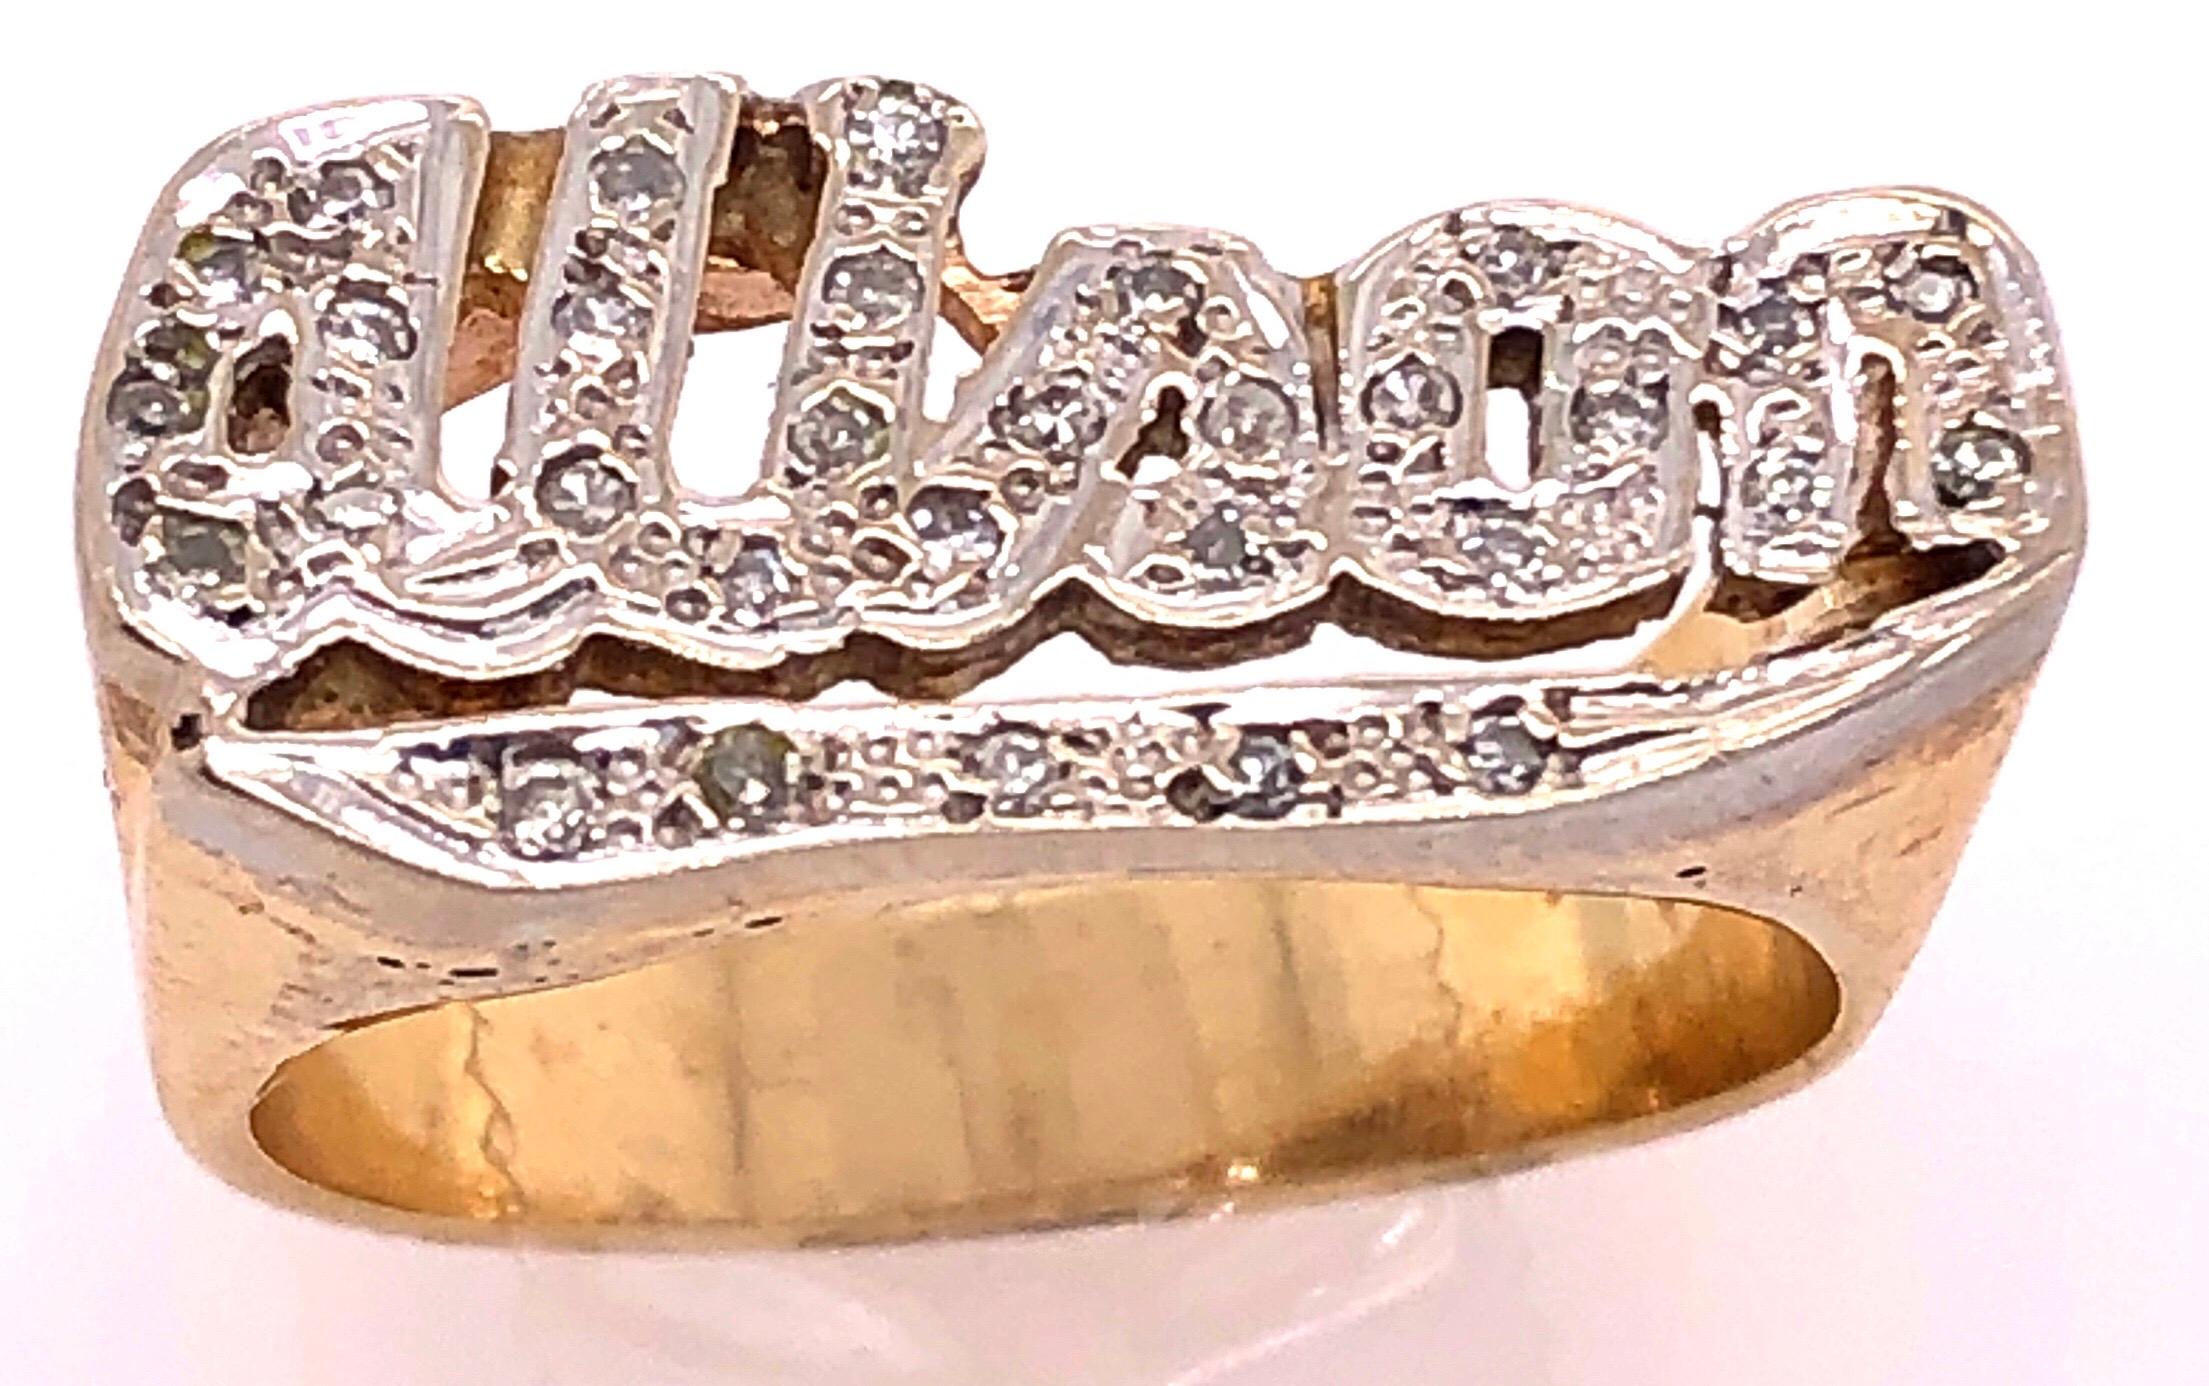 14 Karat Yellow and White Gold Name Alison Signet Ring with Diamonds
Many name rings available simply ask for the name you are looking for and we will inform you should we have it in stock. 
21 piece round diamonds.
Size 7
8 grams total weight.